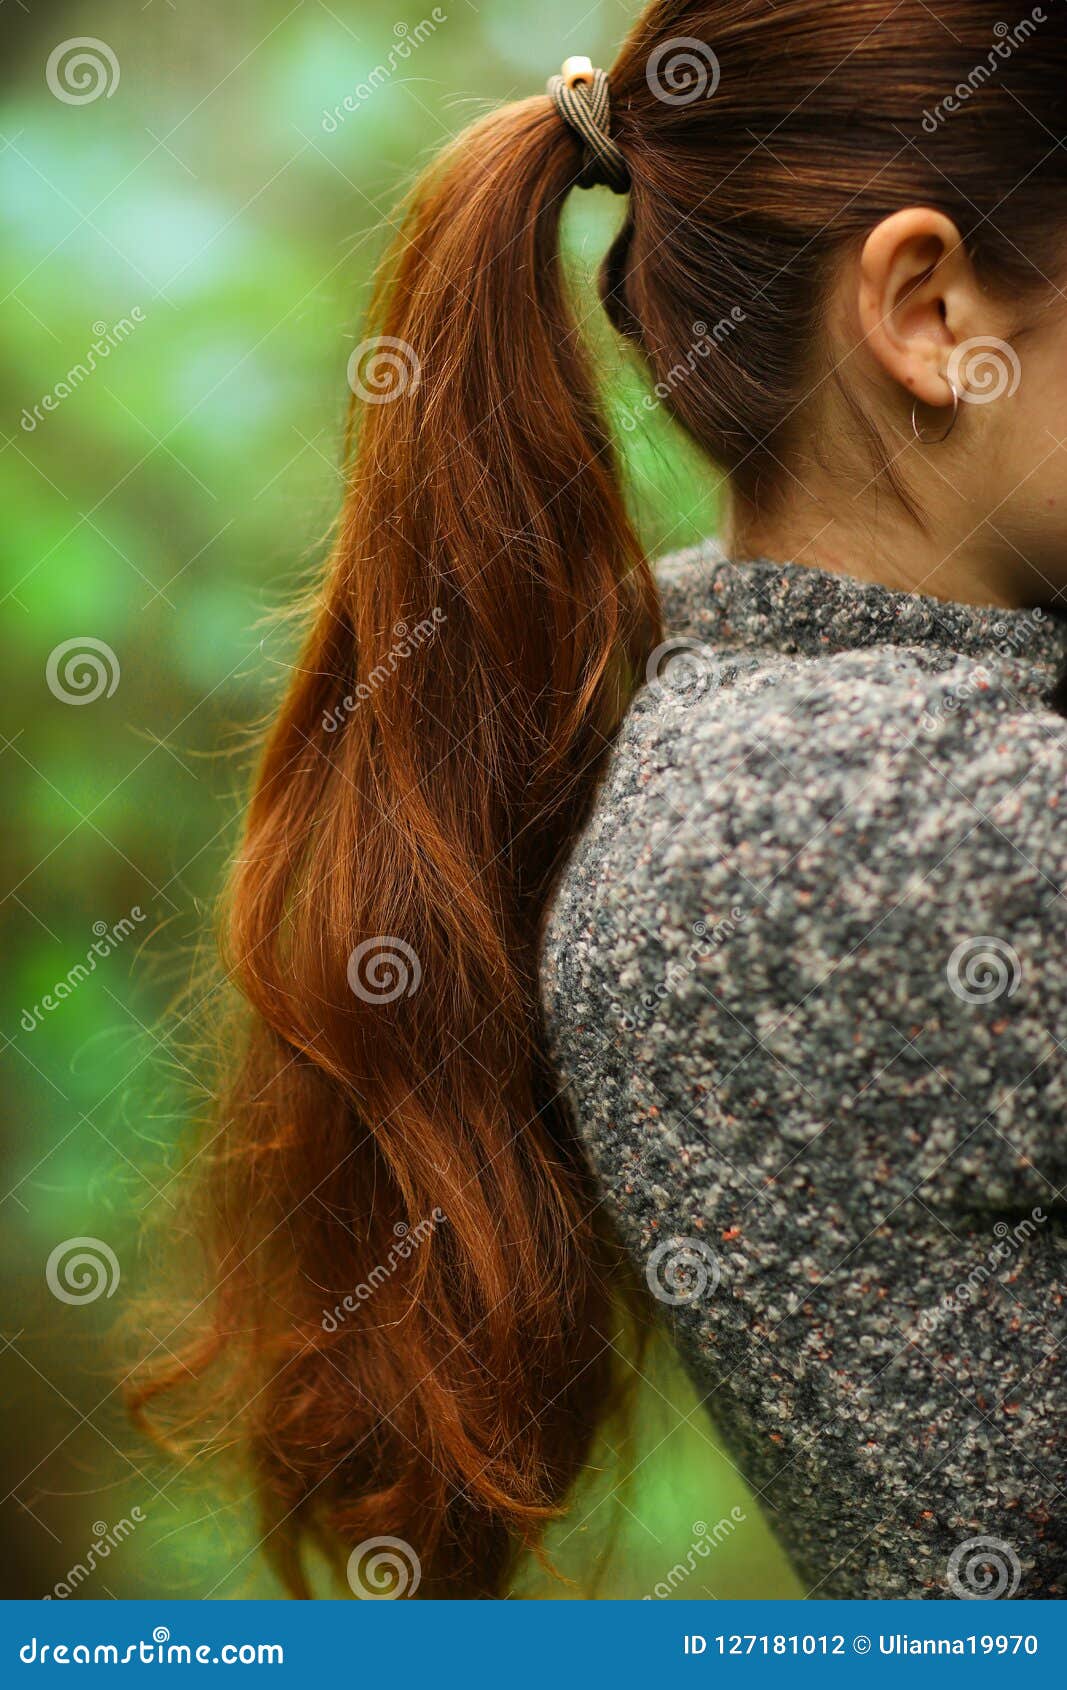 woman with long thick brown hair pony tale close up photo on green summer garden background